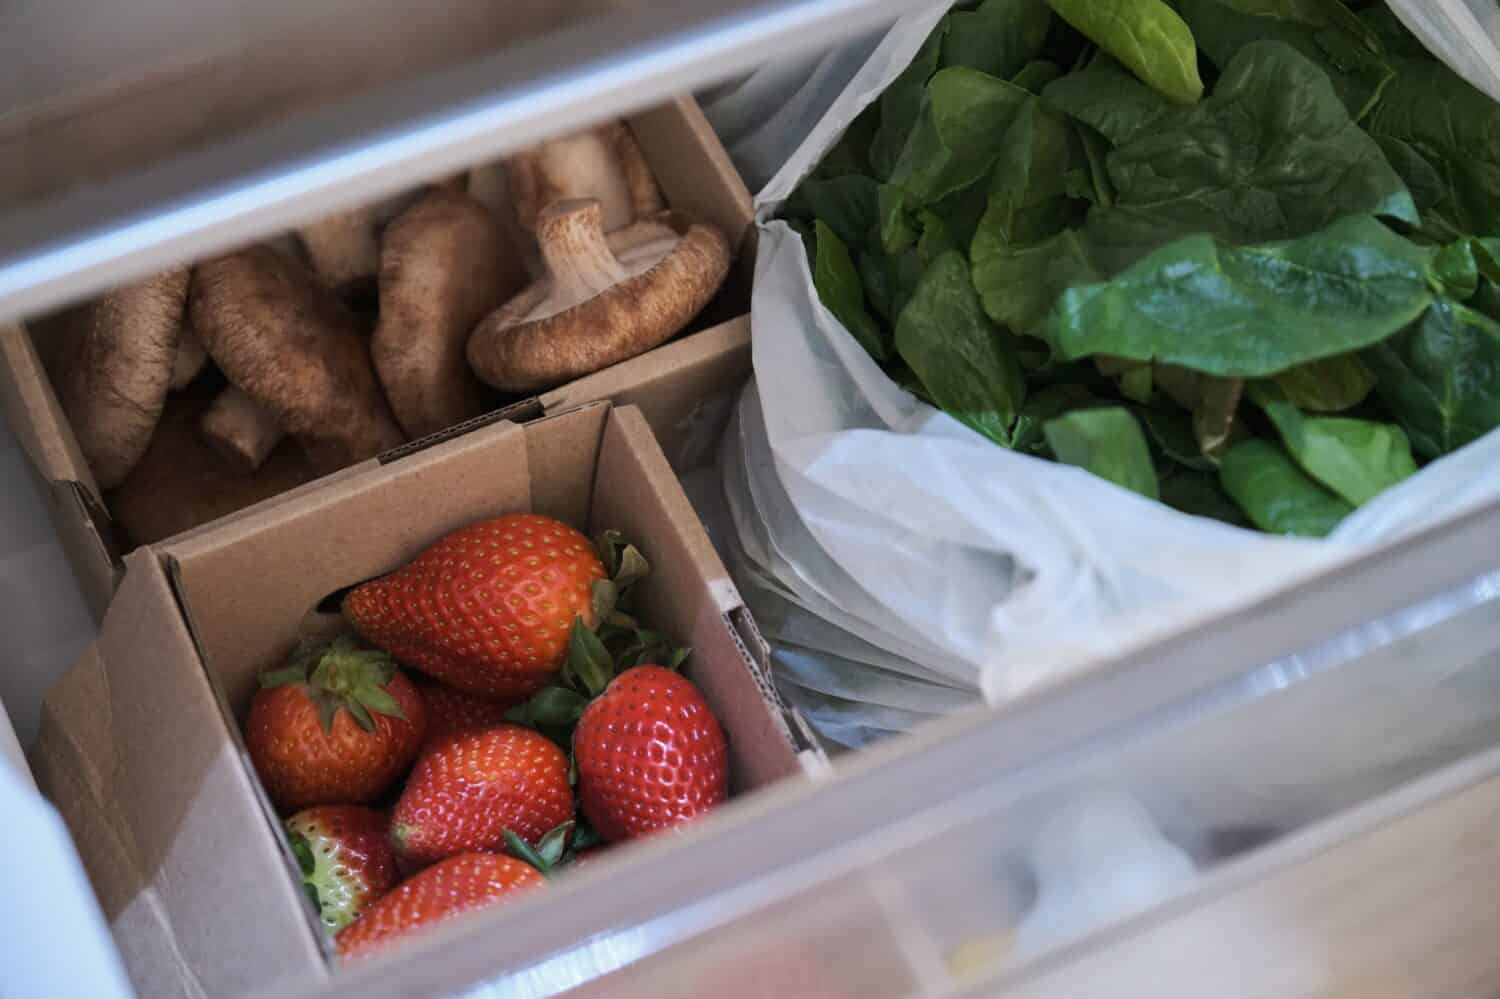 Strawberries, shitake mushrooms and spinach in the vegetable drawer of the opened fridge.